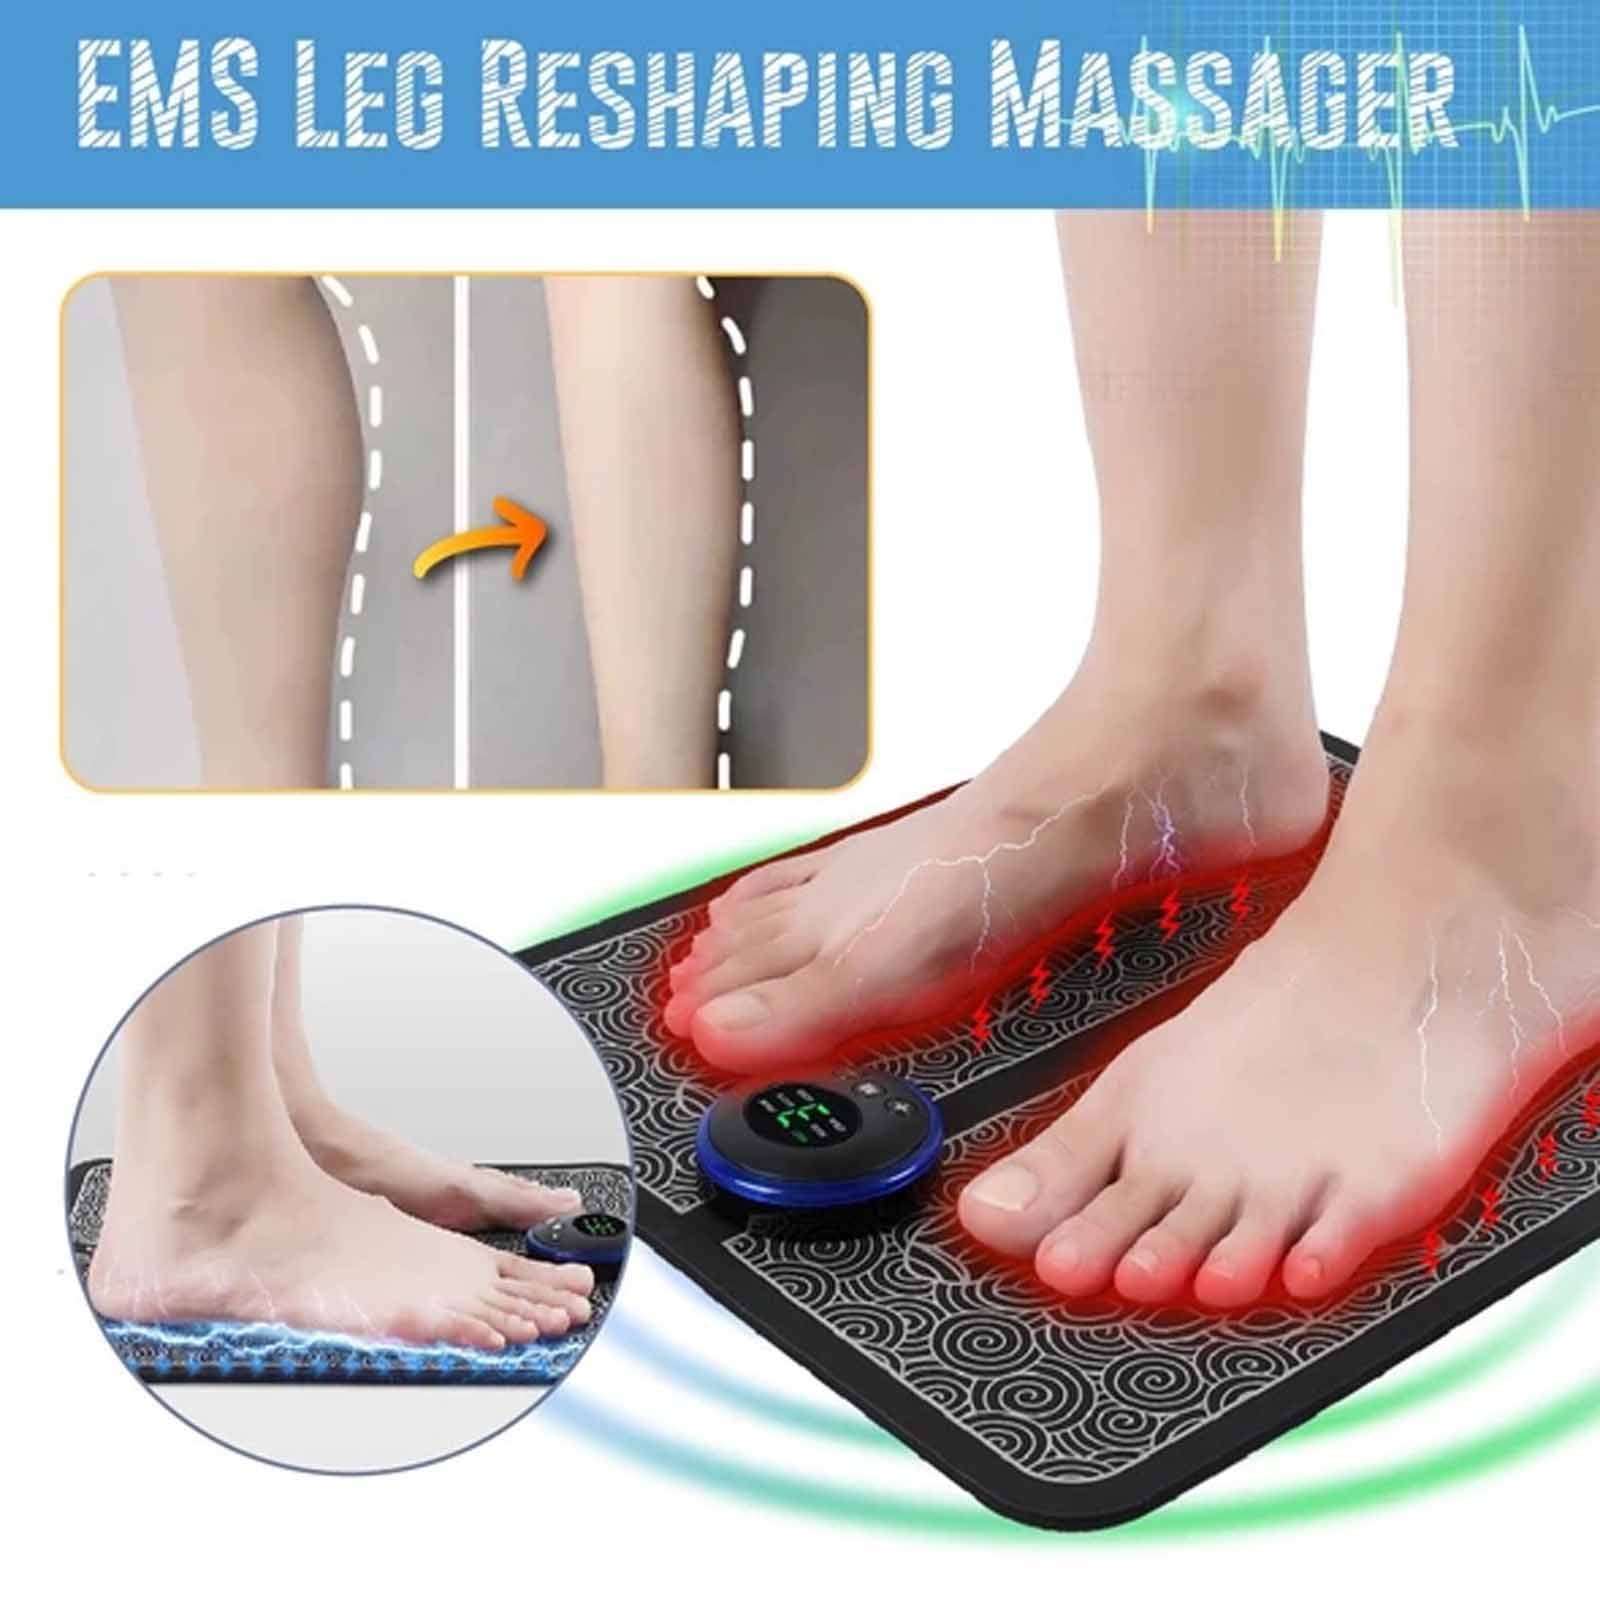 EMS Foot Massager for Circulation and Pain Relief (FSA HSA